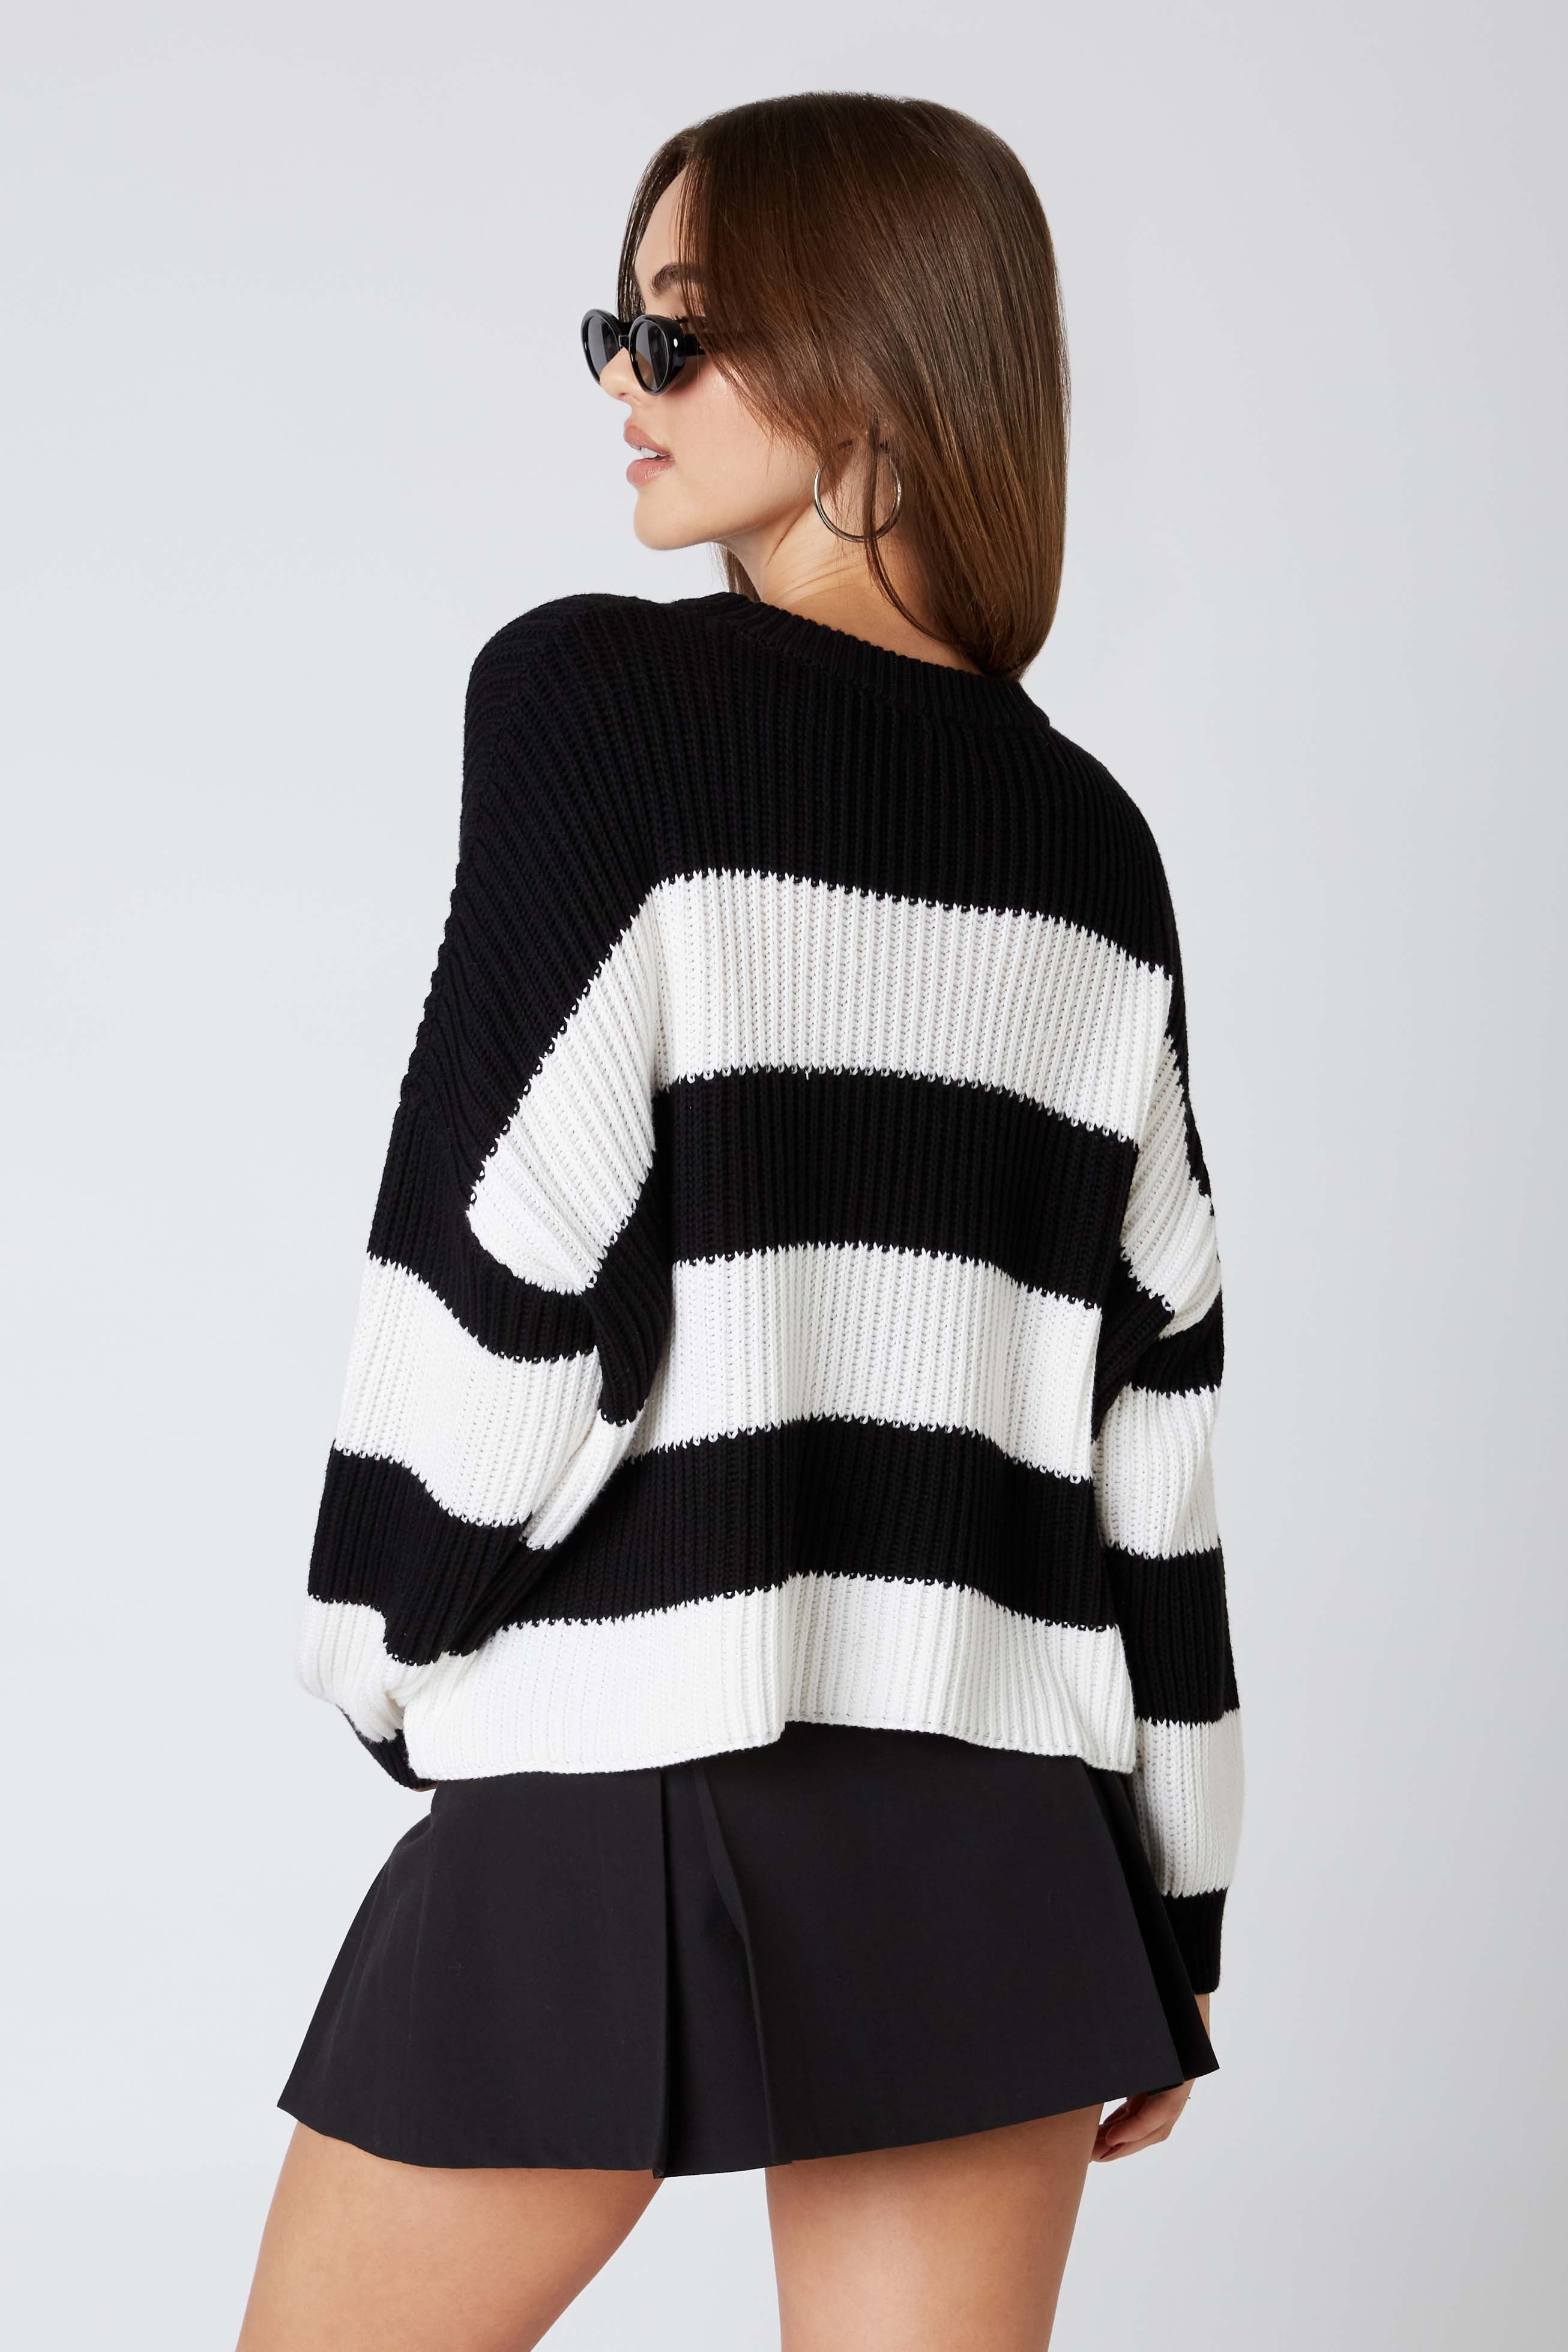 Rugby Oversized Sweater in Black White Back View